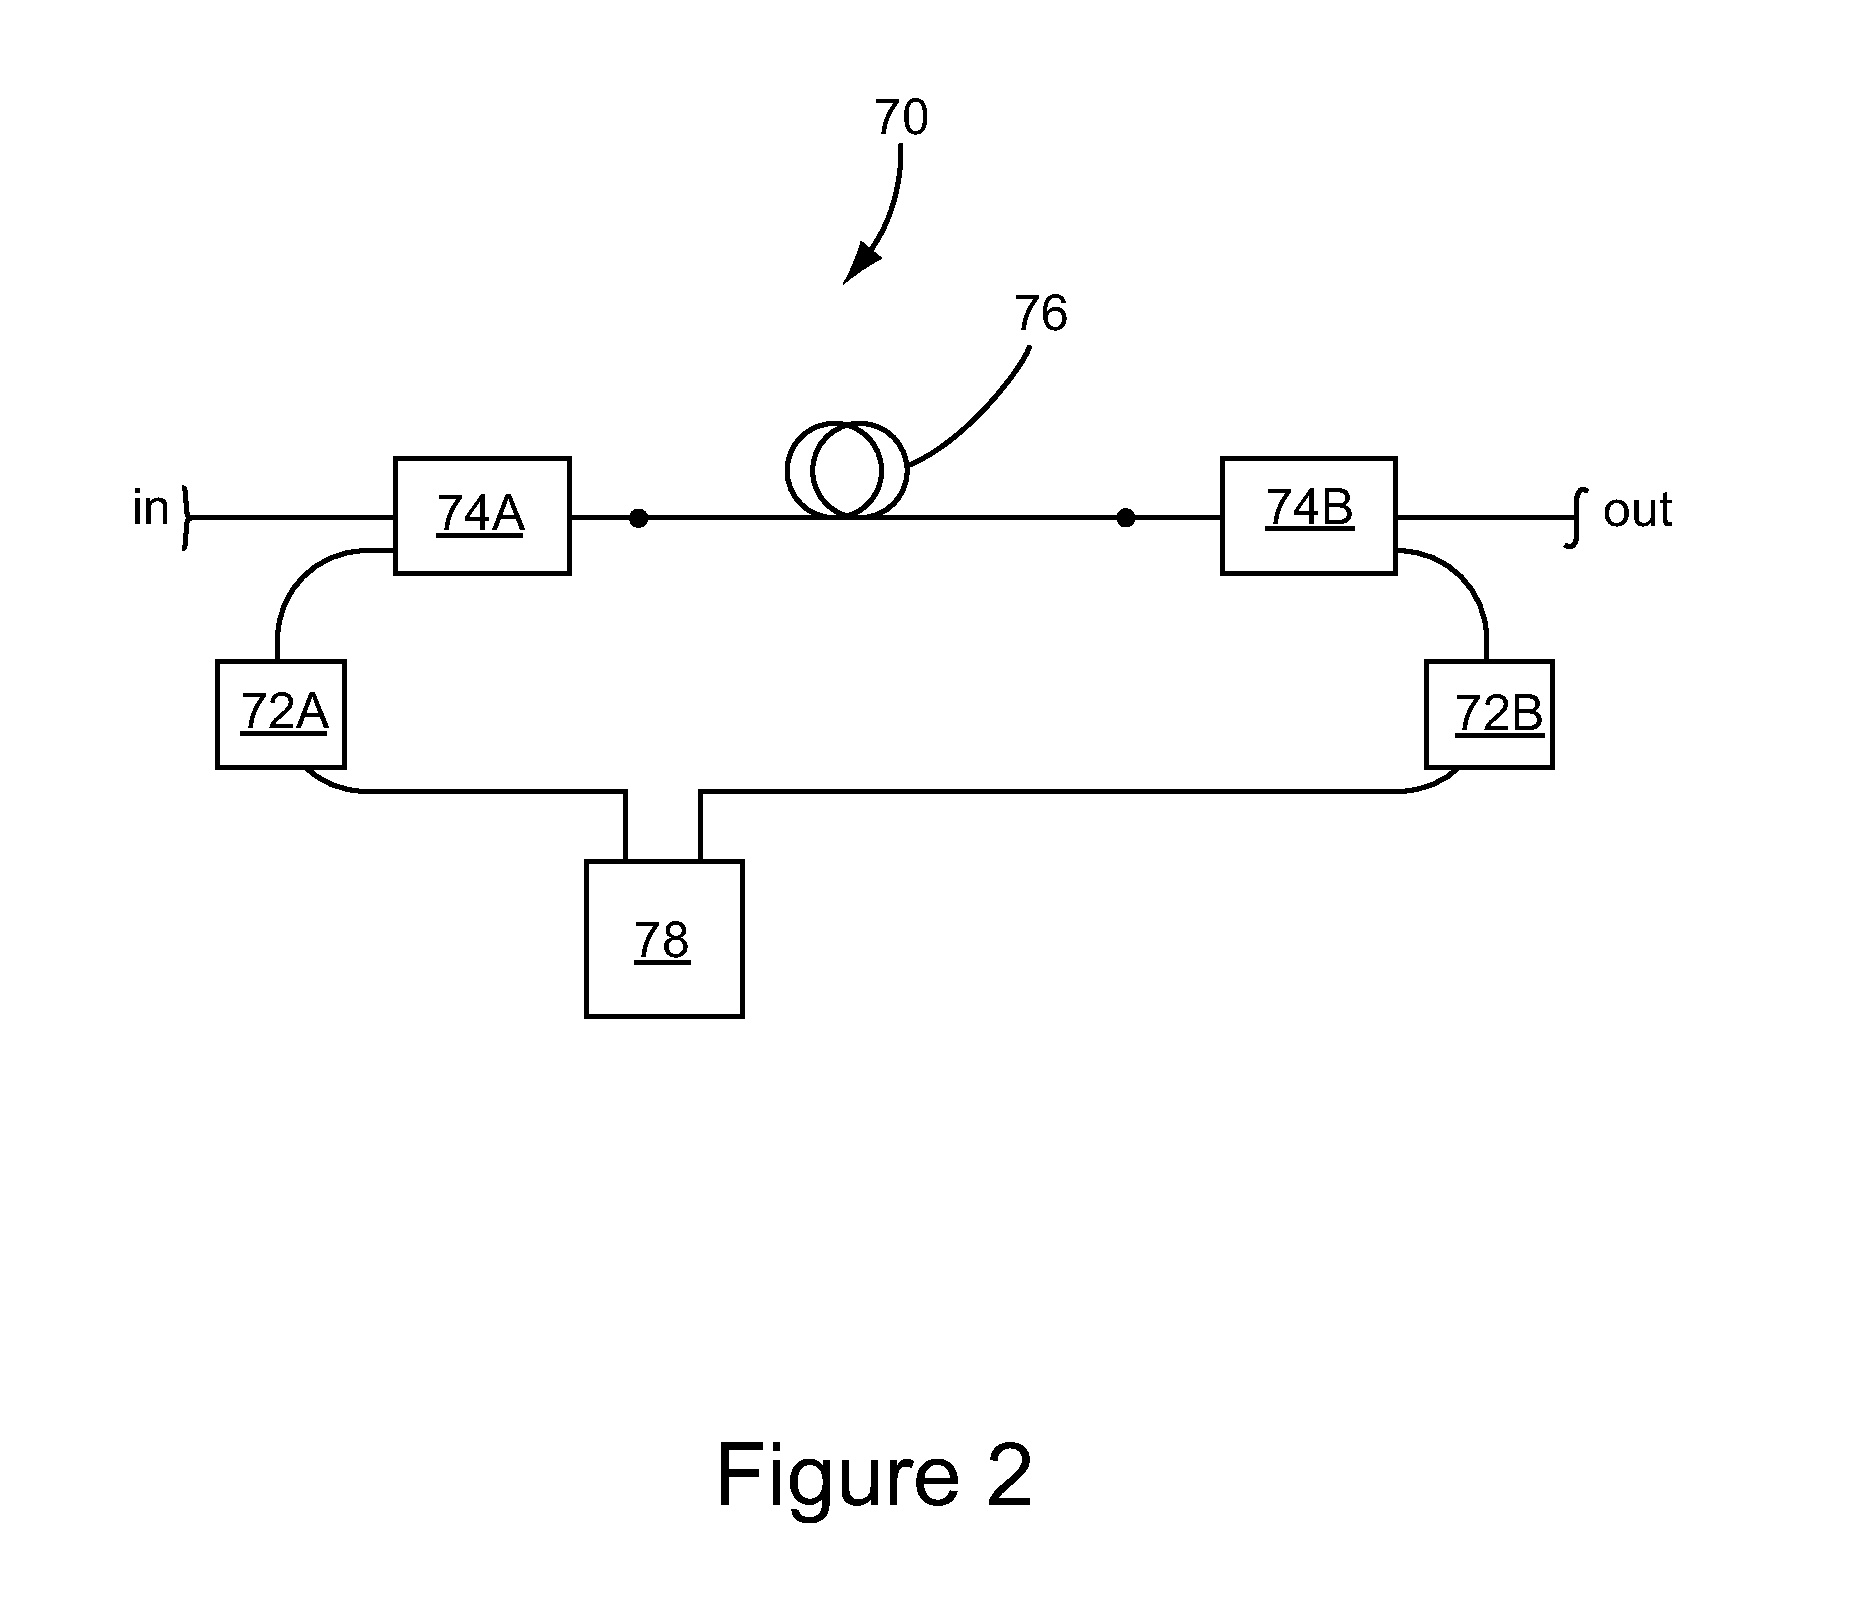 Methods and Apparatus Pertaining to Picosecond Pulsed Fiber Based Lasers